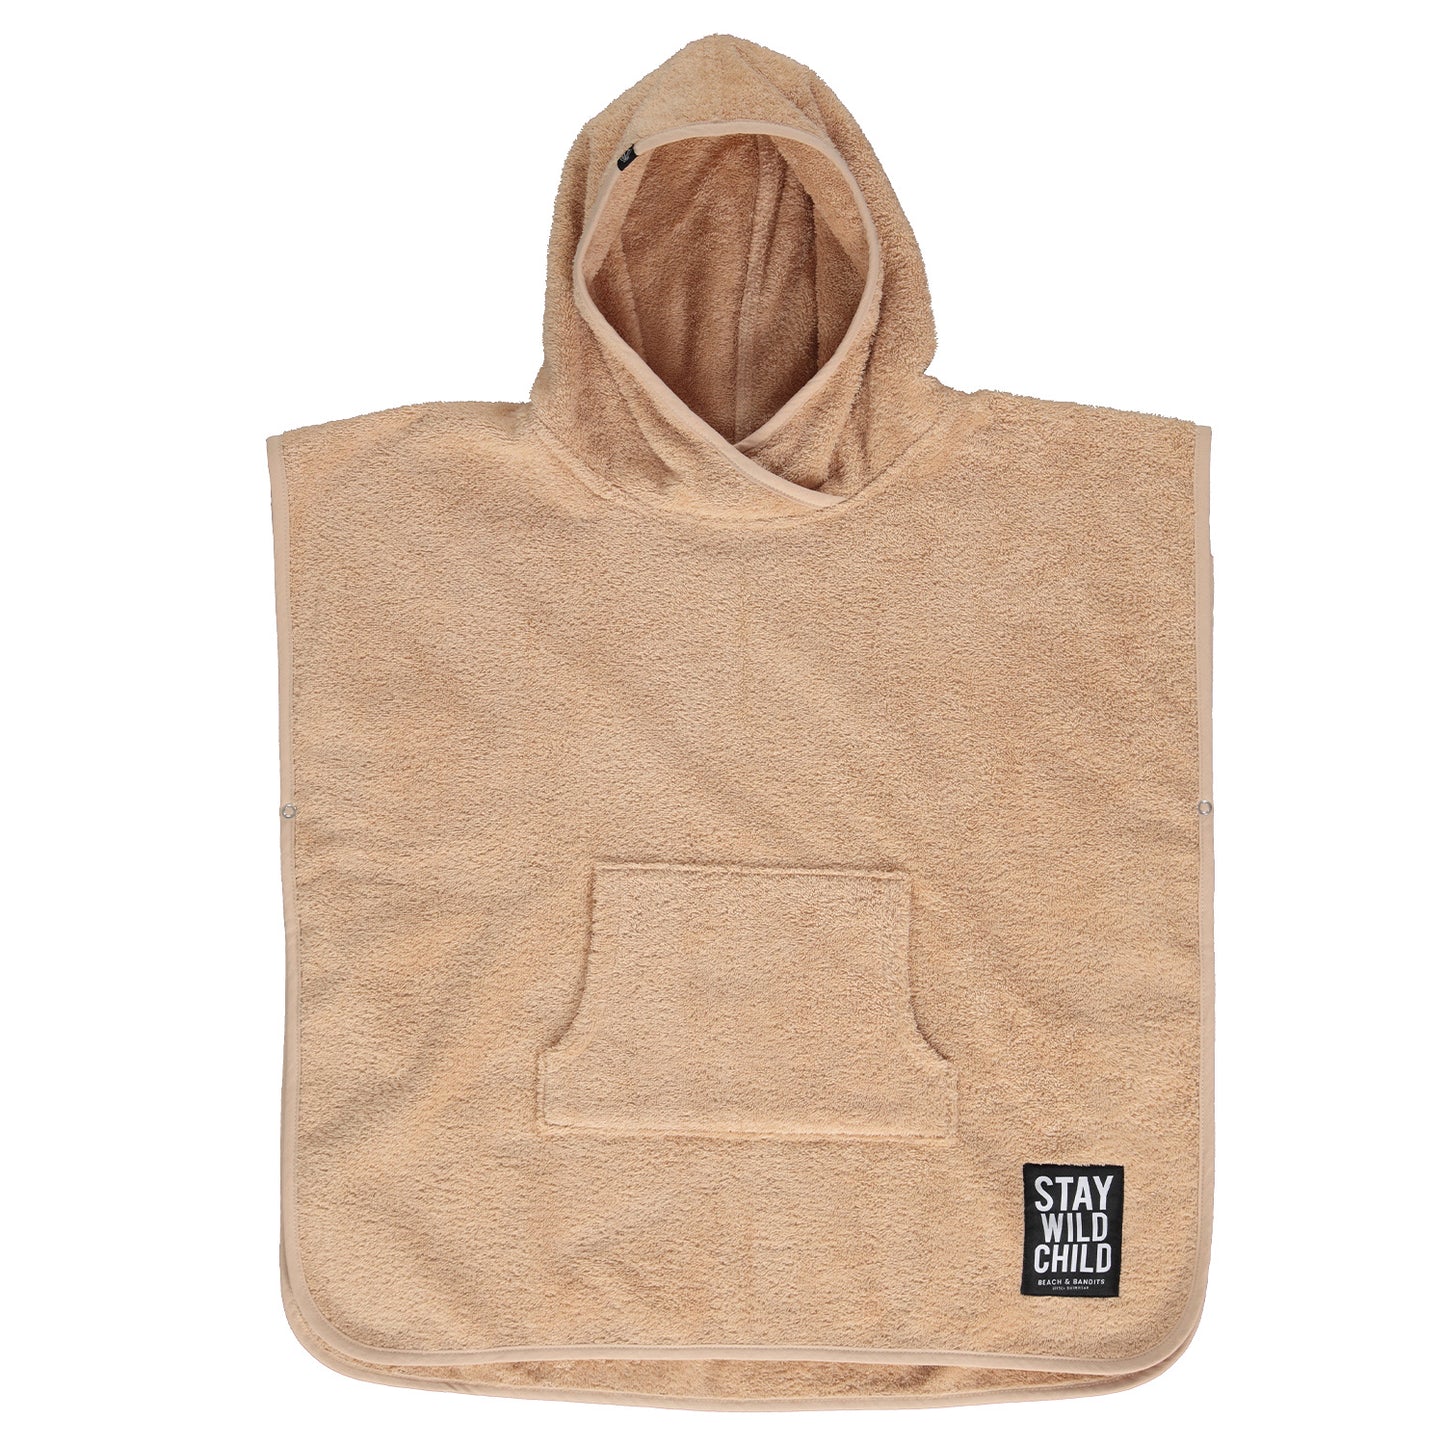 This picture shows a beach poncho made out of 100% organic cotton in the colour sand